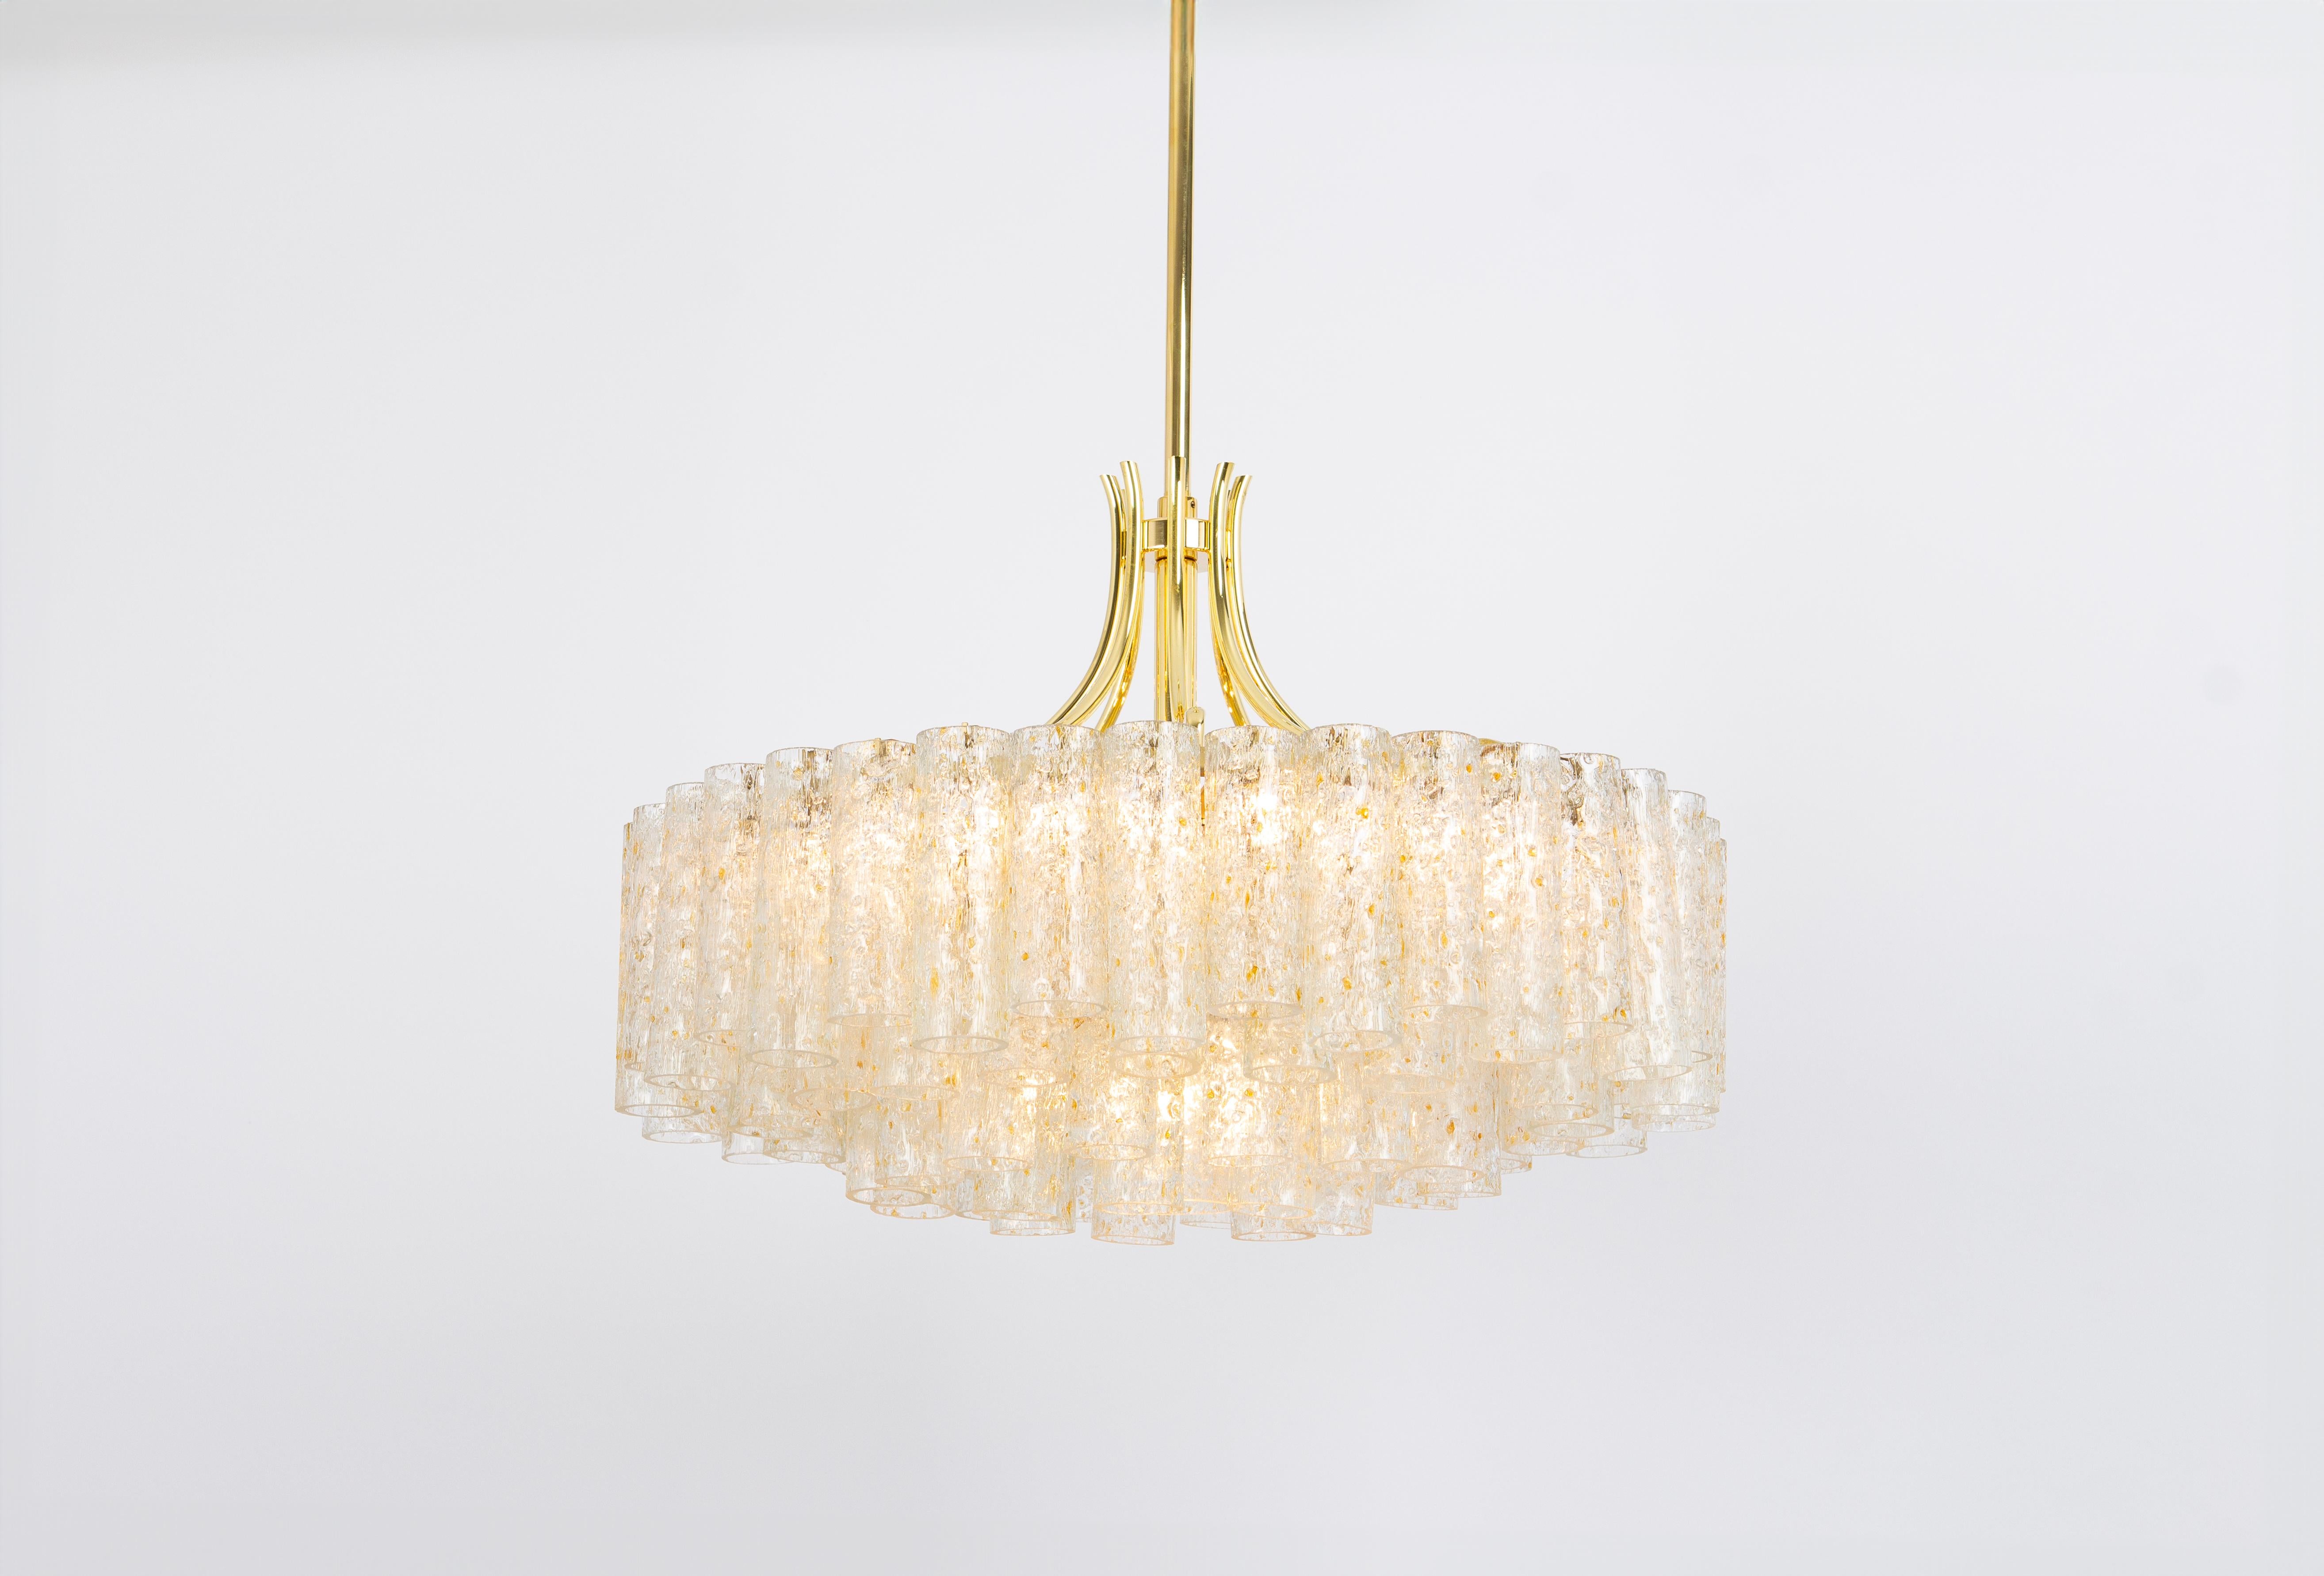 1 of 2 Stunning Large Doria Ice Glass Tubes Chandelier, Germany, 1960s For Sale 1